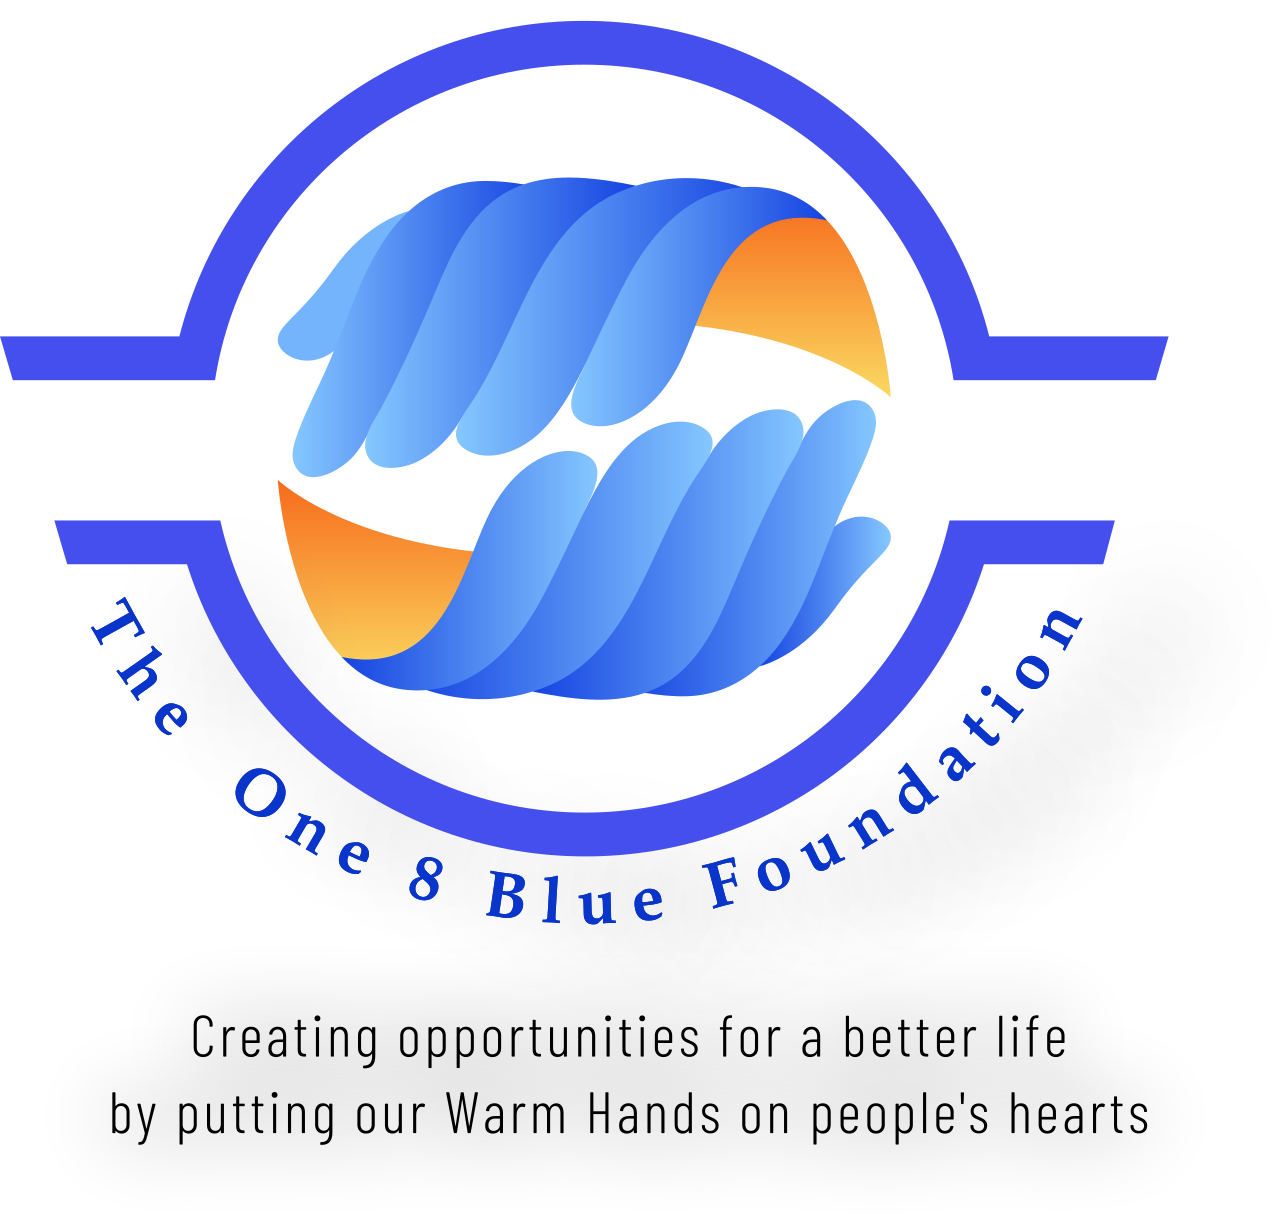 The  One 8 Blue Foundation's logo